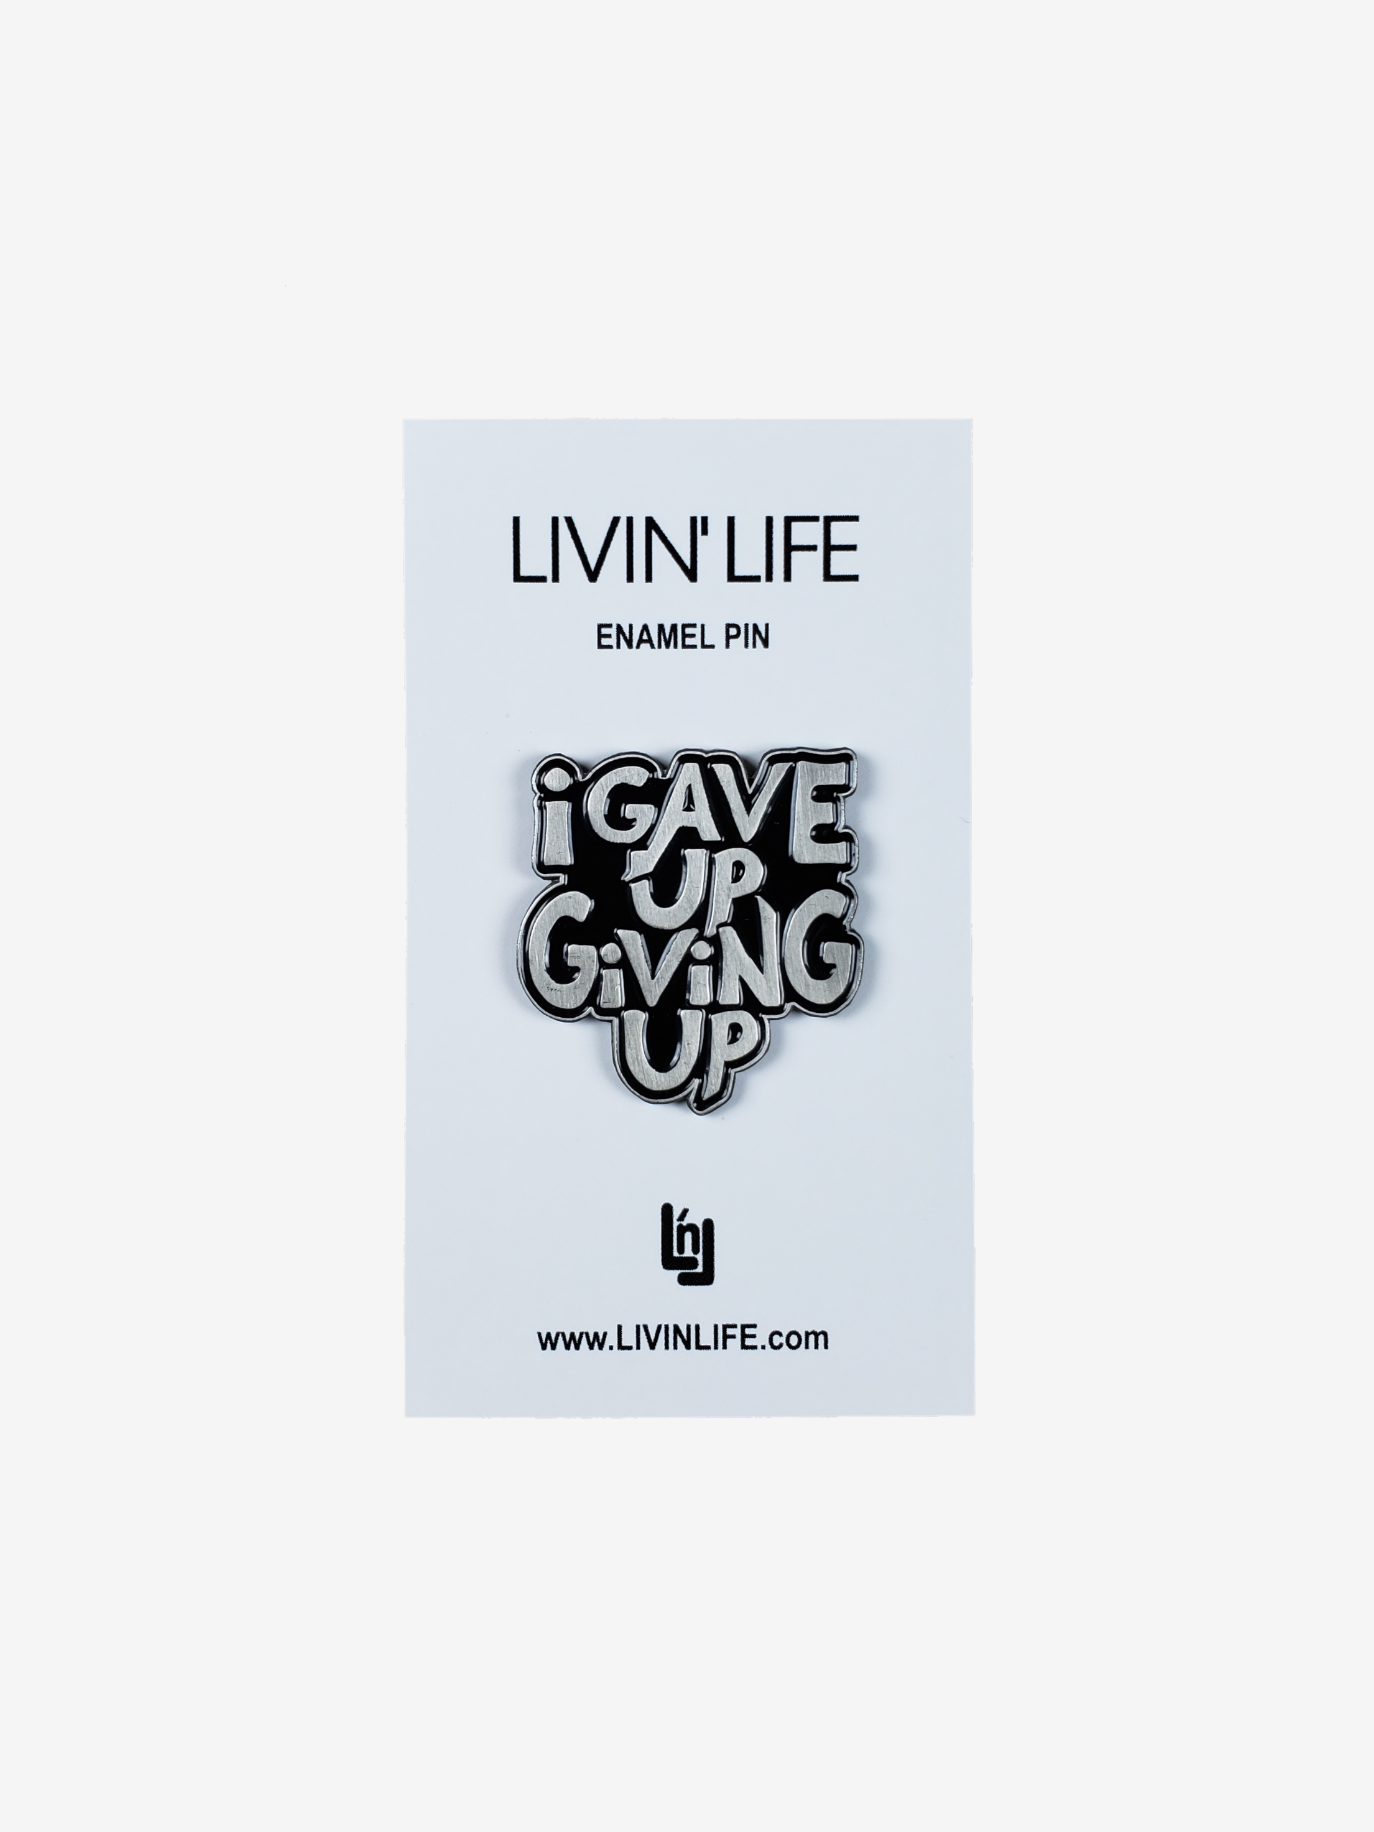 I Gave Up Giving Up Enamel Pin